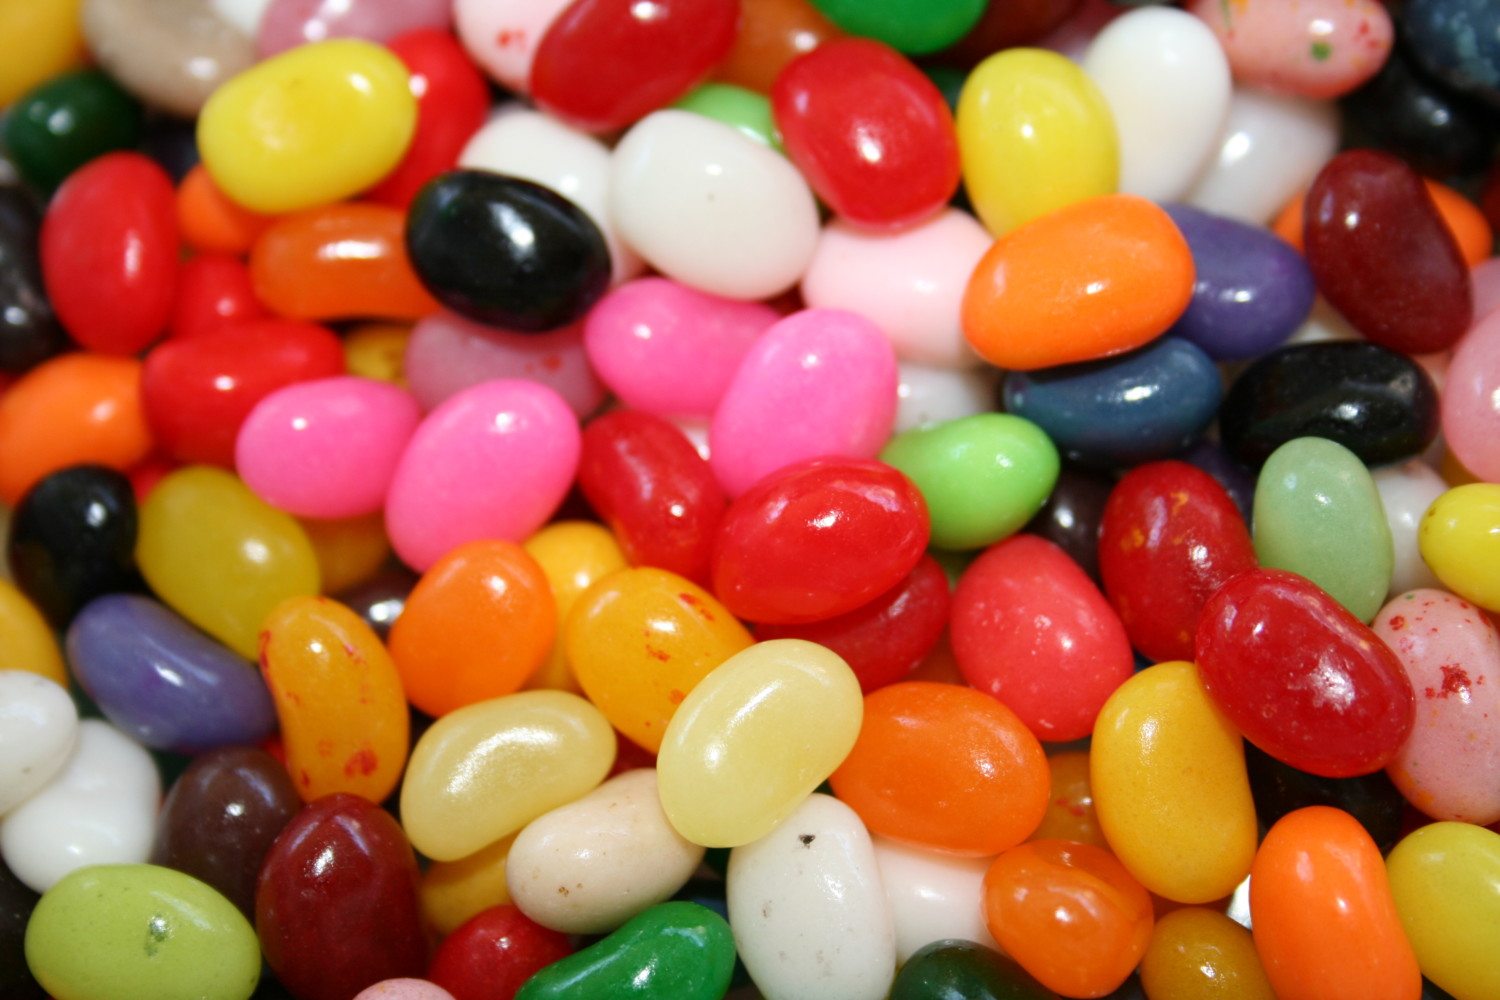 jelly beans photo